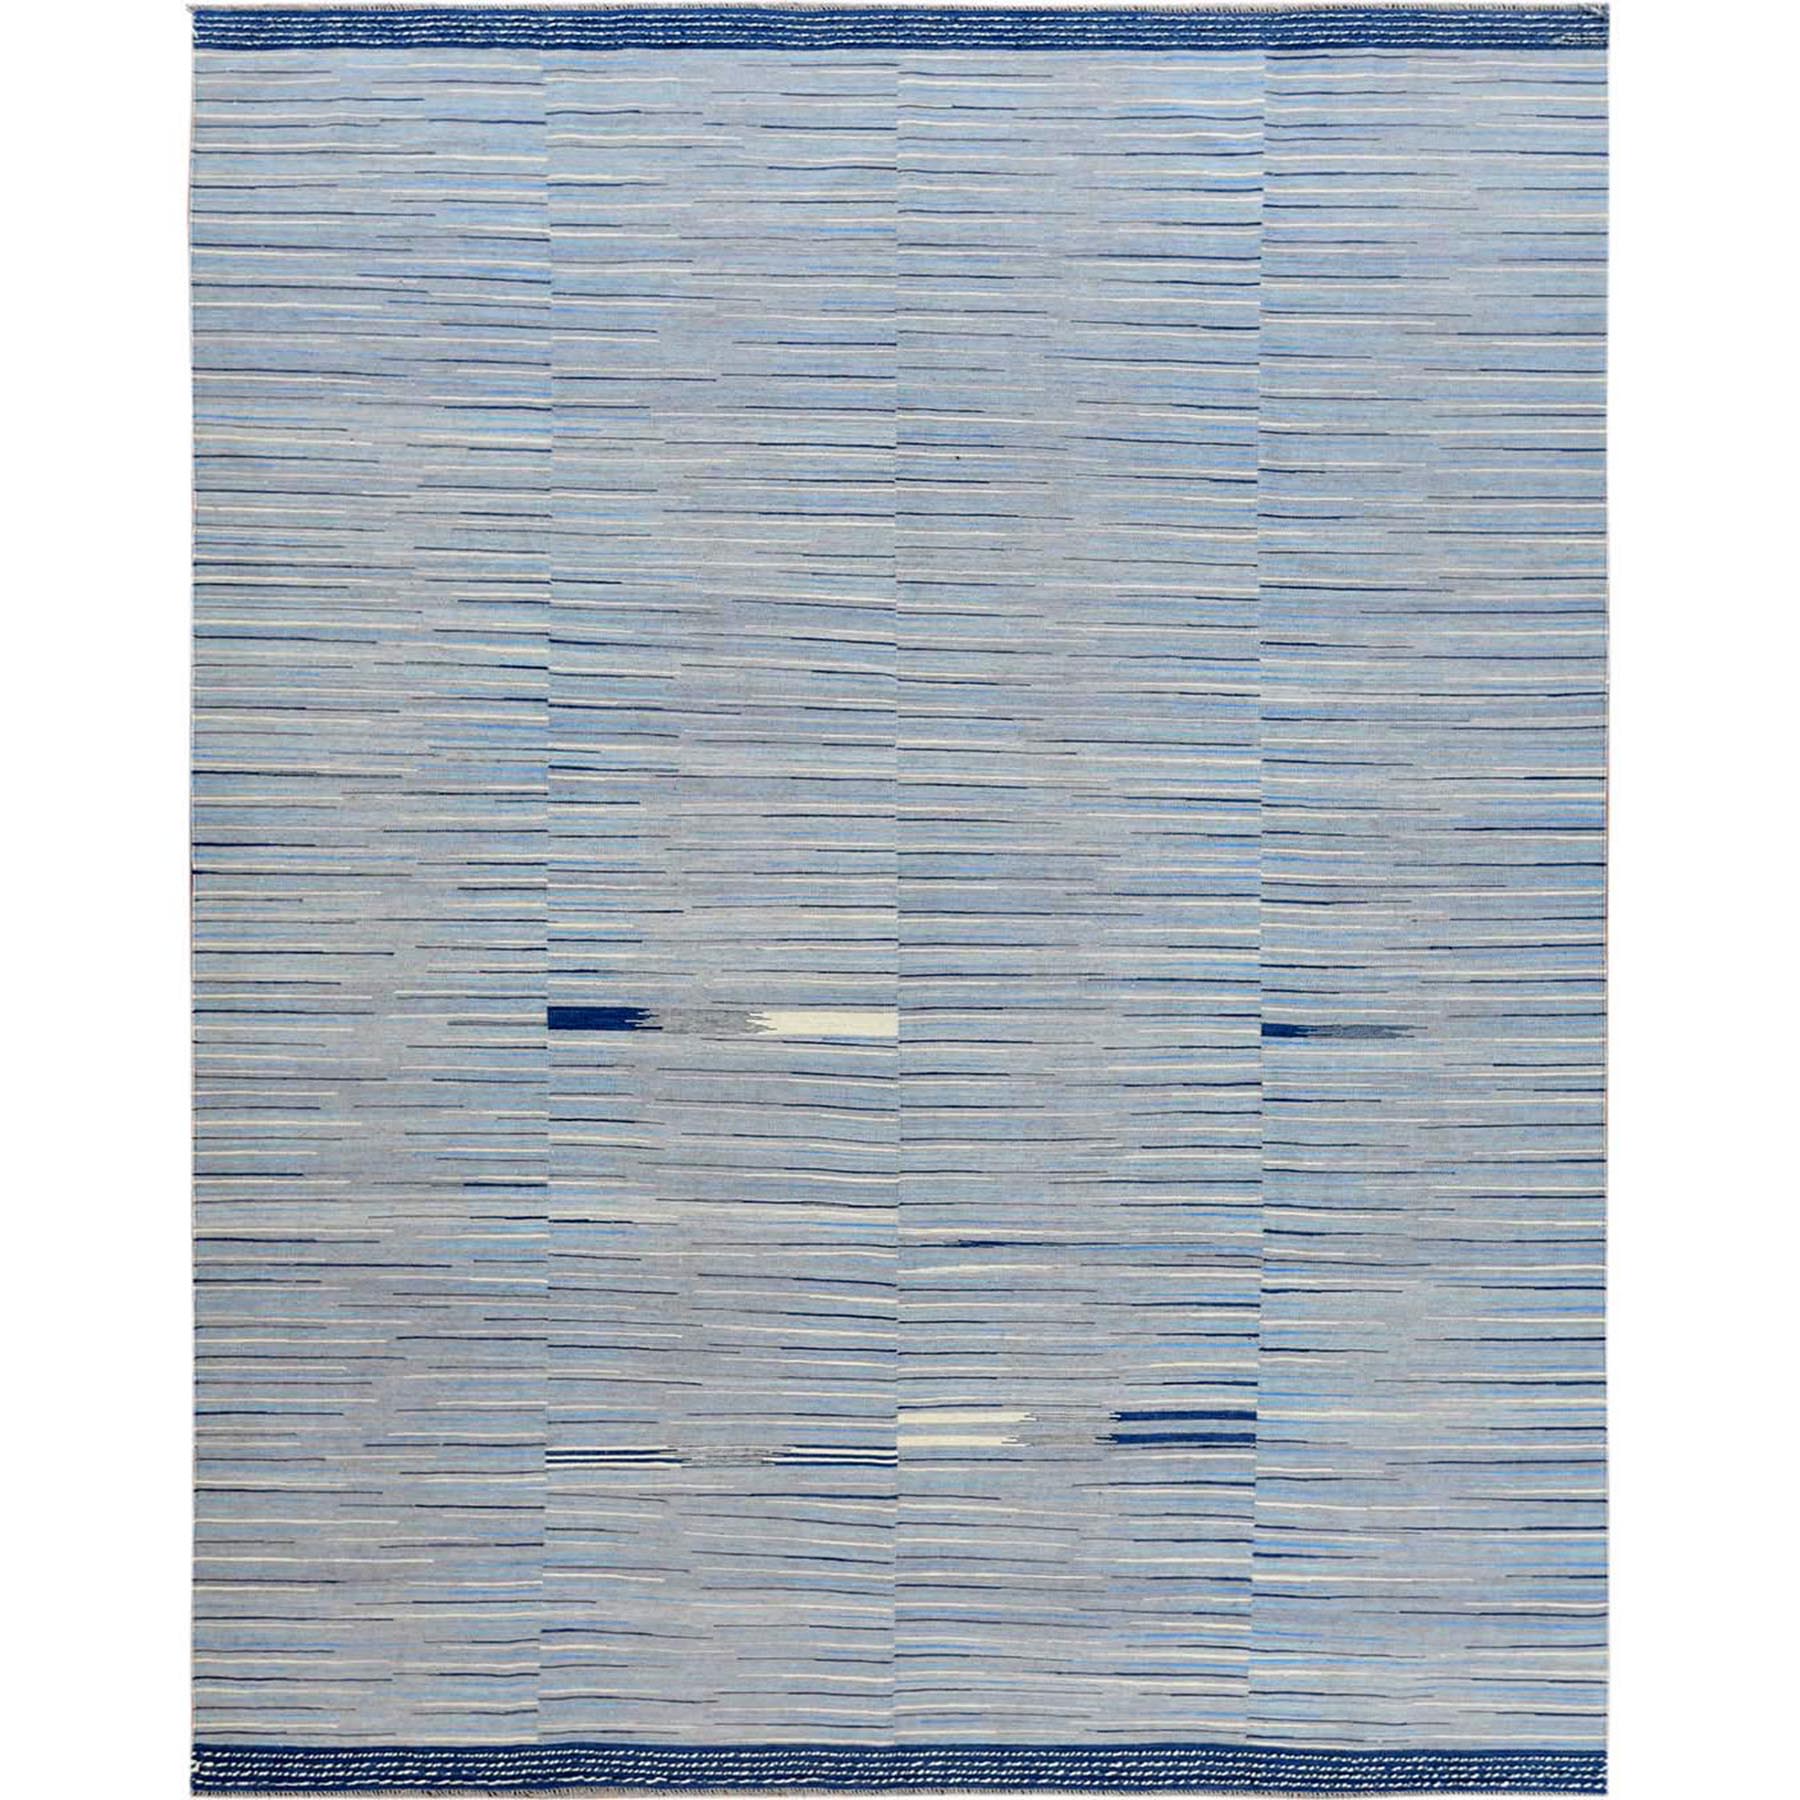 Modern & Contemporary Wool Hand-Woven Area Rug 9'6